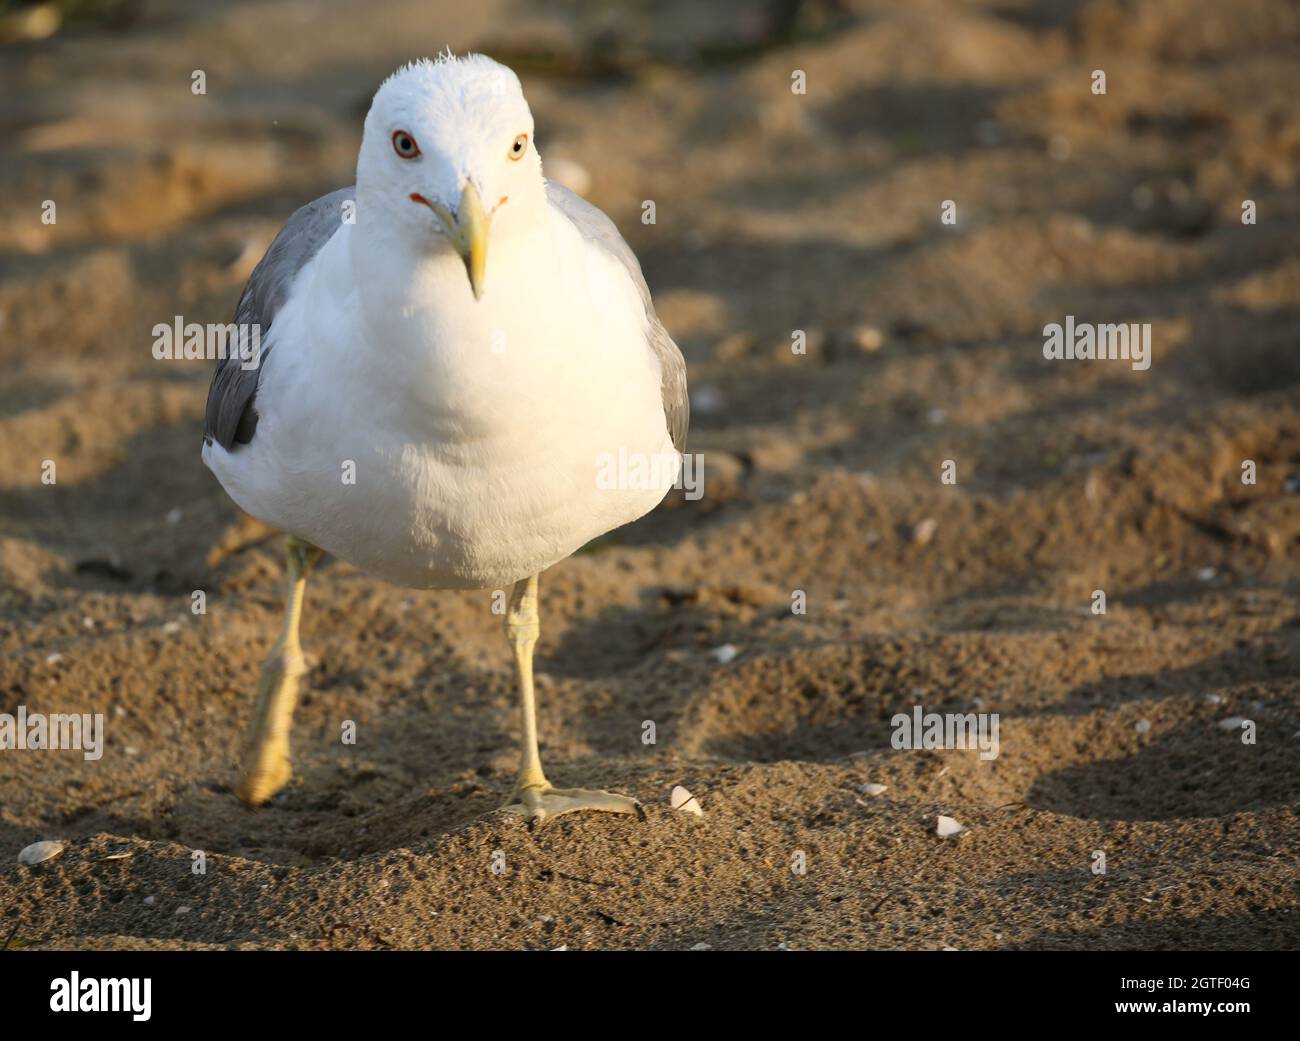 Seagull With White And Gray Feathers On The Beach Stock Photo